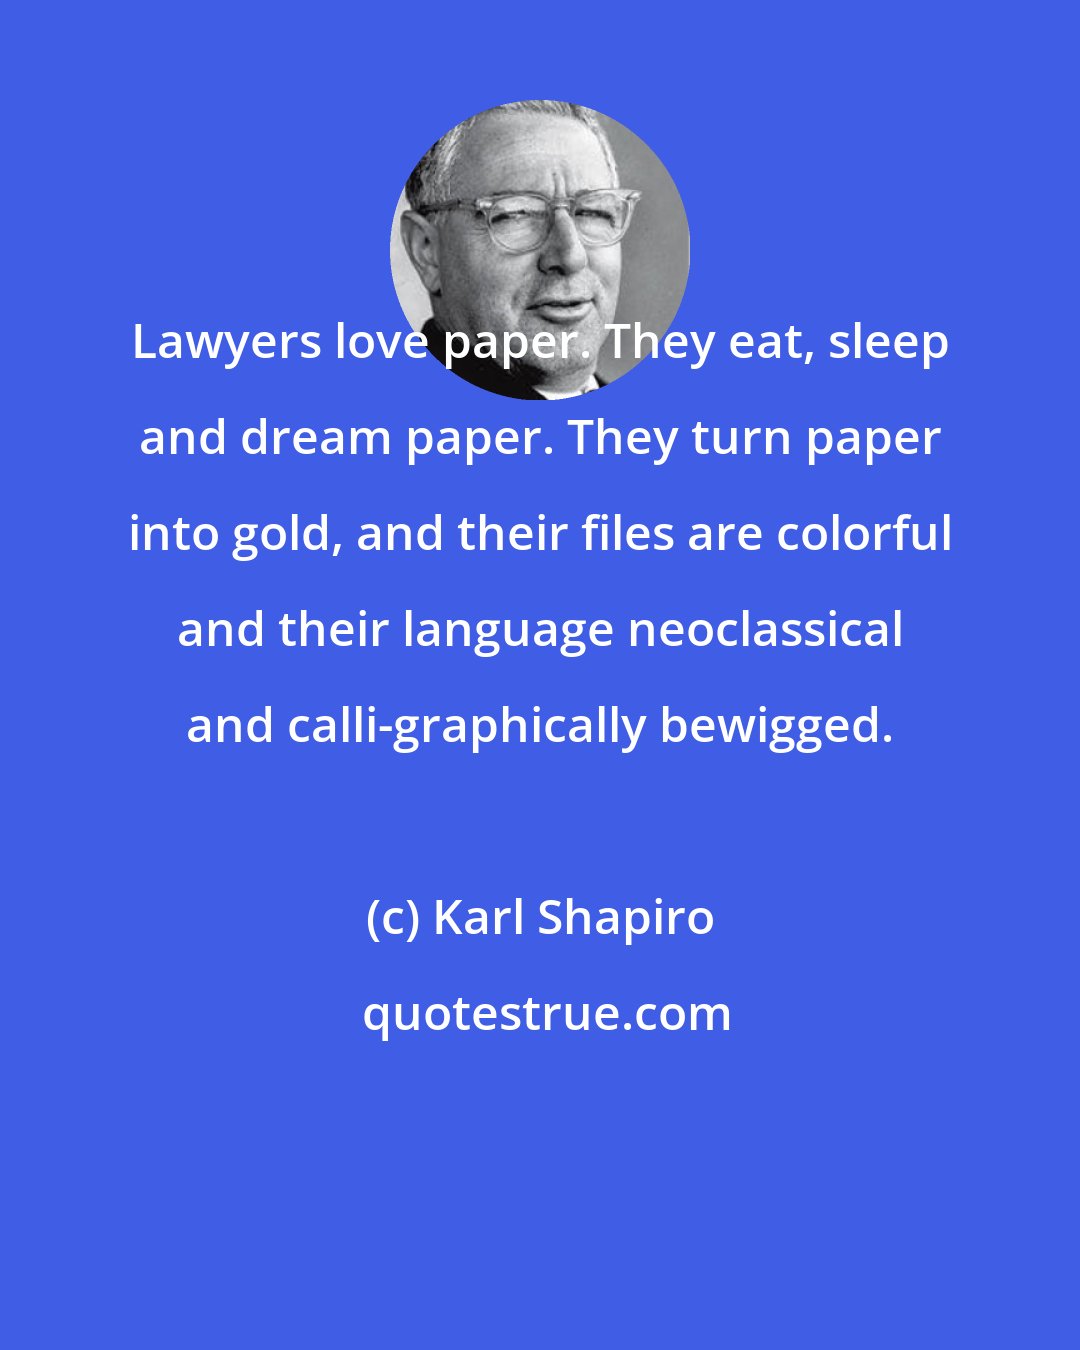 Karl Shapiro: Lawyers love paper. They eat, sleep and dream paper. They turn paper into gold, and their files are colorful and their language neoclassical and calli-graphically bewigged.